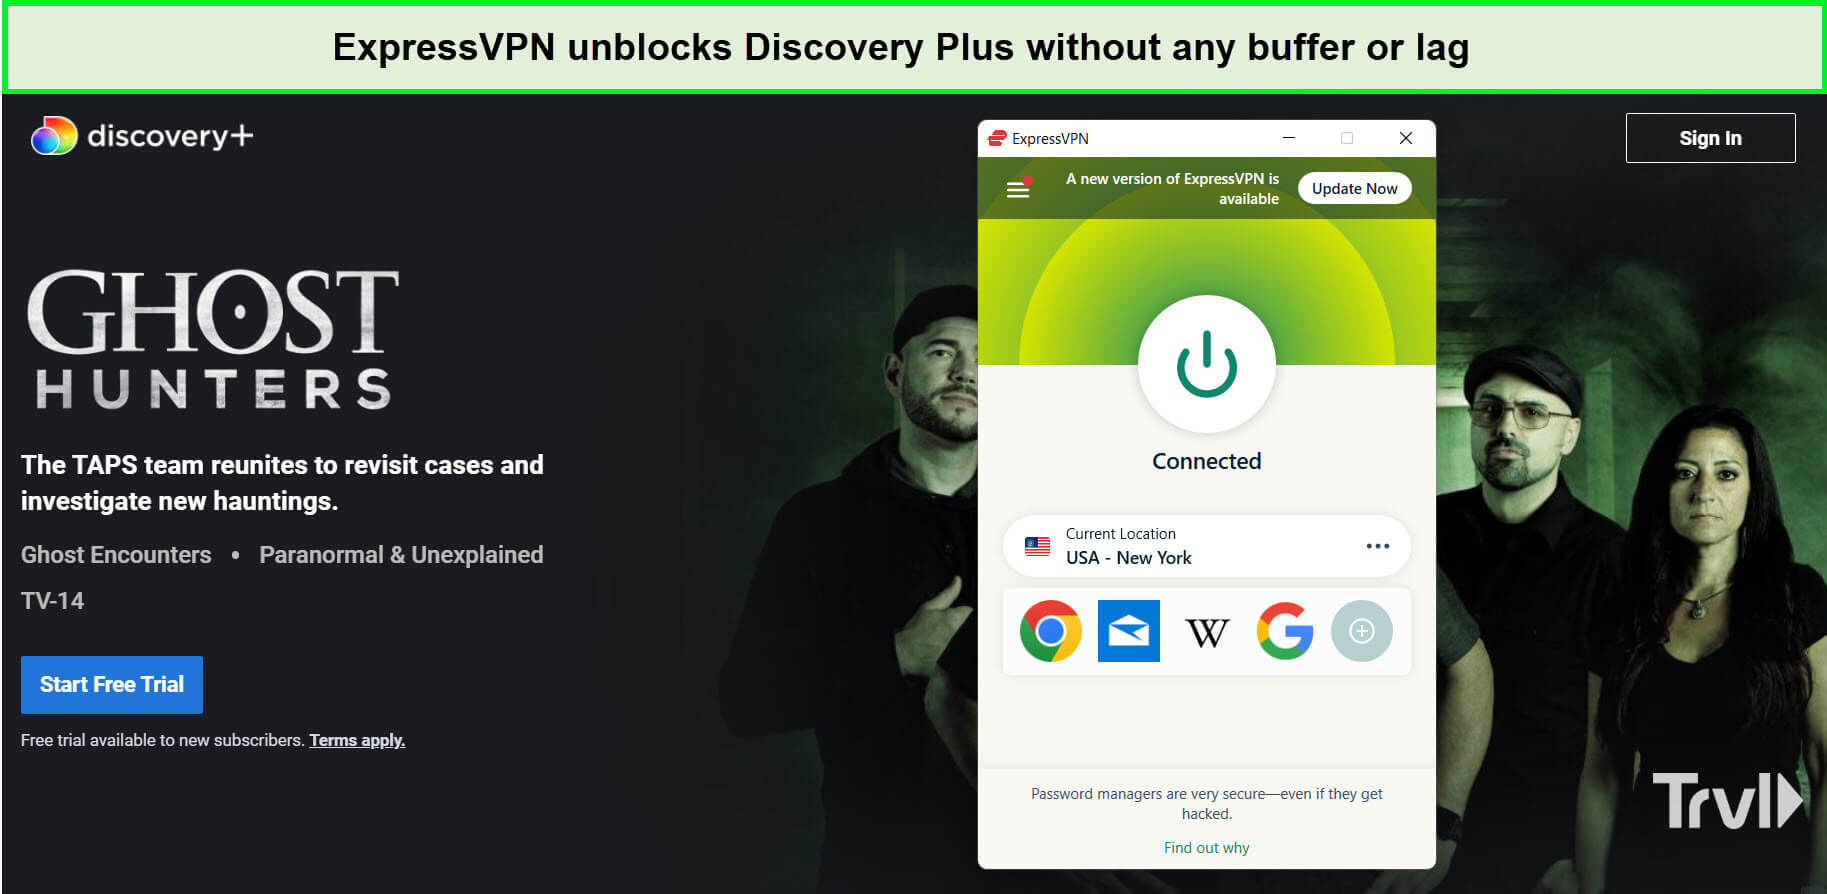 expressvpn-unblocks-ghost-hunters-on-discovery-plus-in-Spain